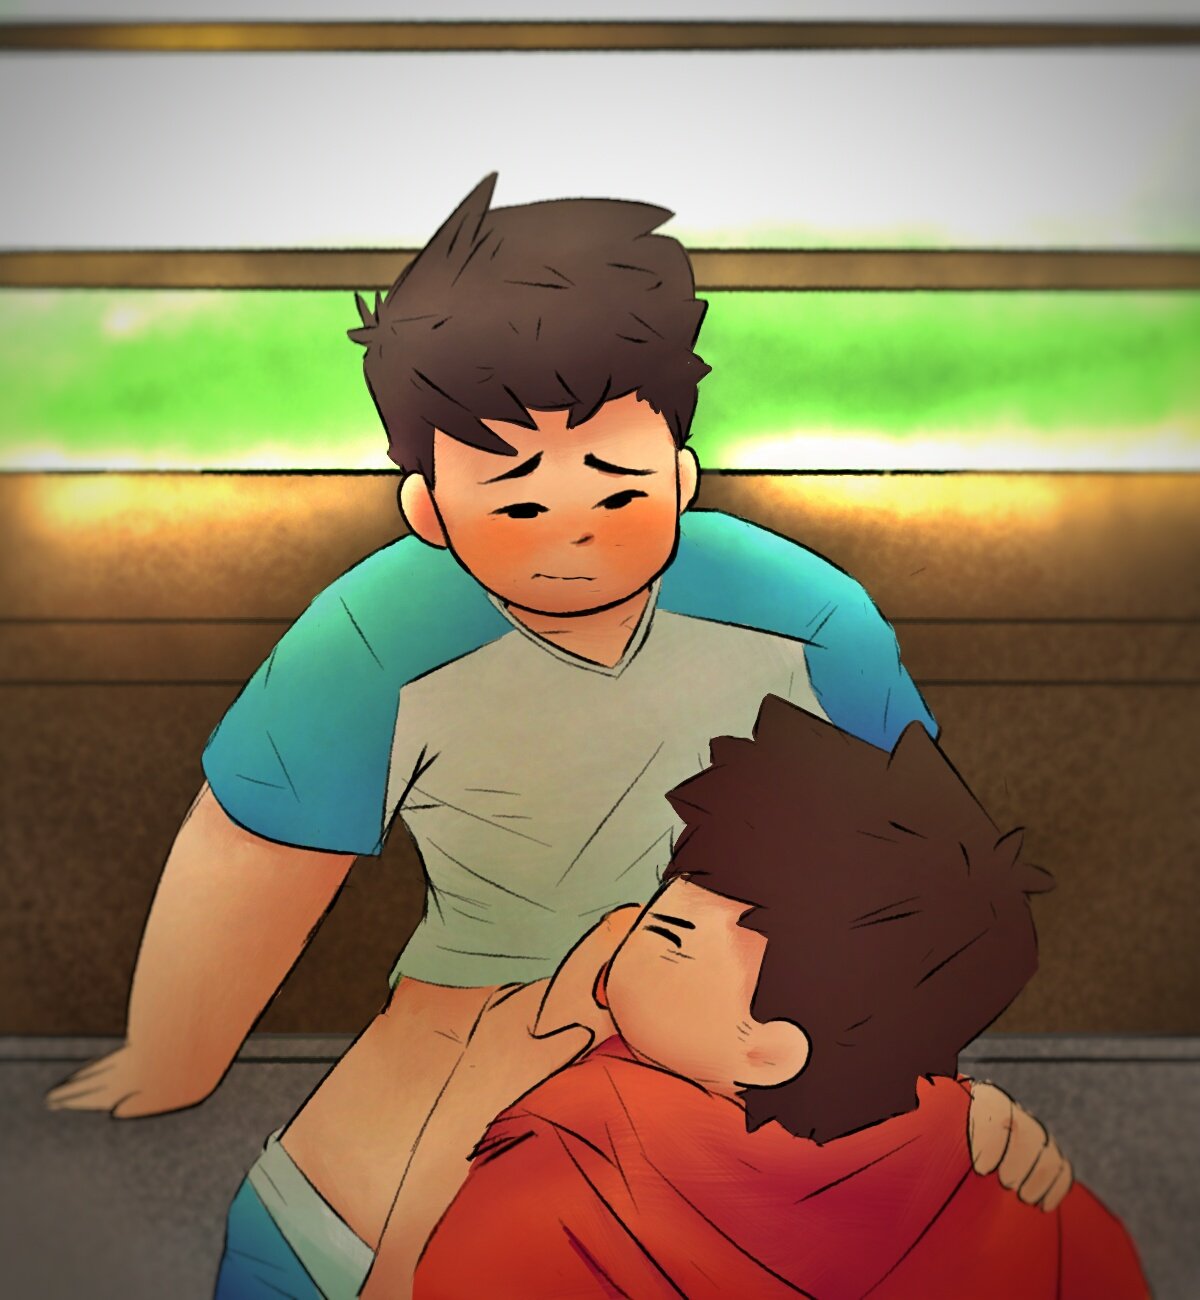 Phicobenze is (02) on X: After practice training #shota #bara #yaoi #gay  #boys #soccer #afternoon t.co5di7on45E9  X